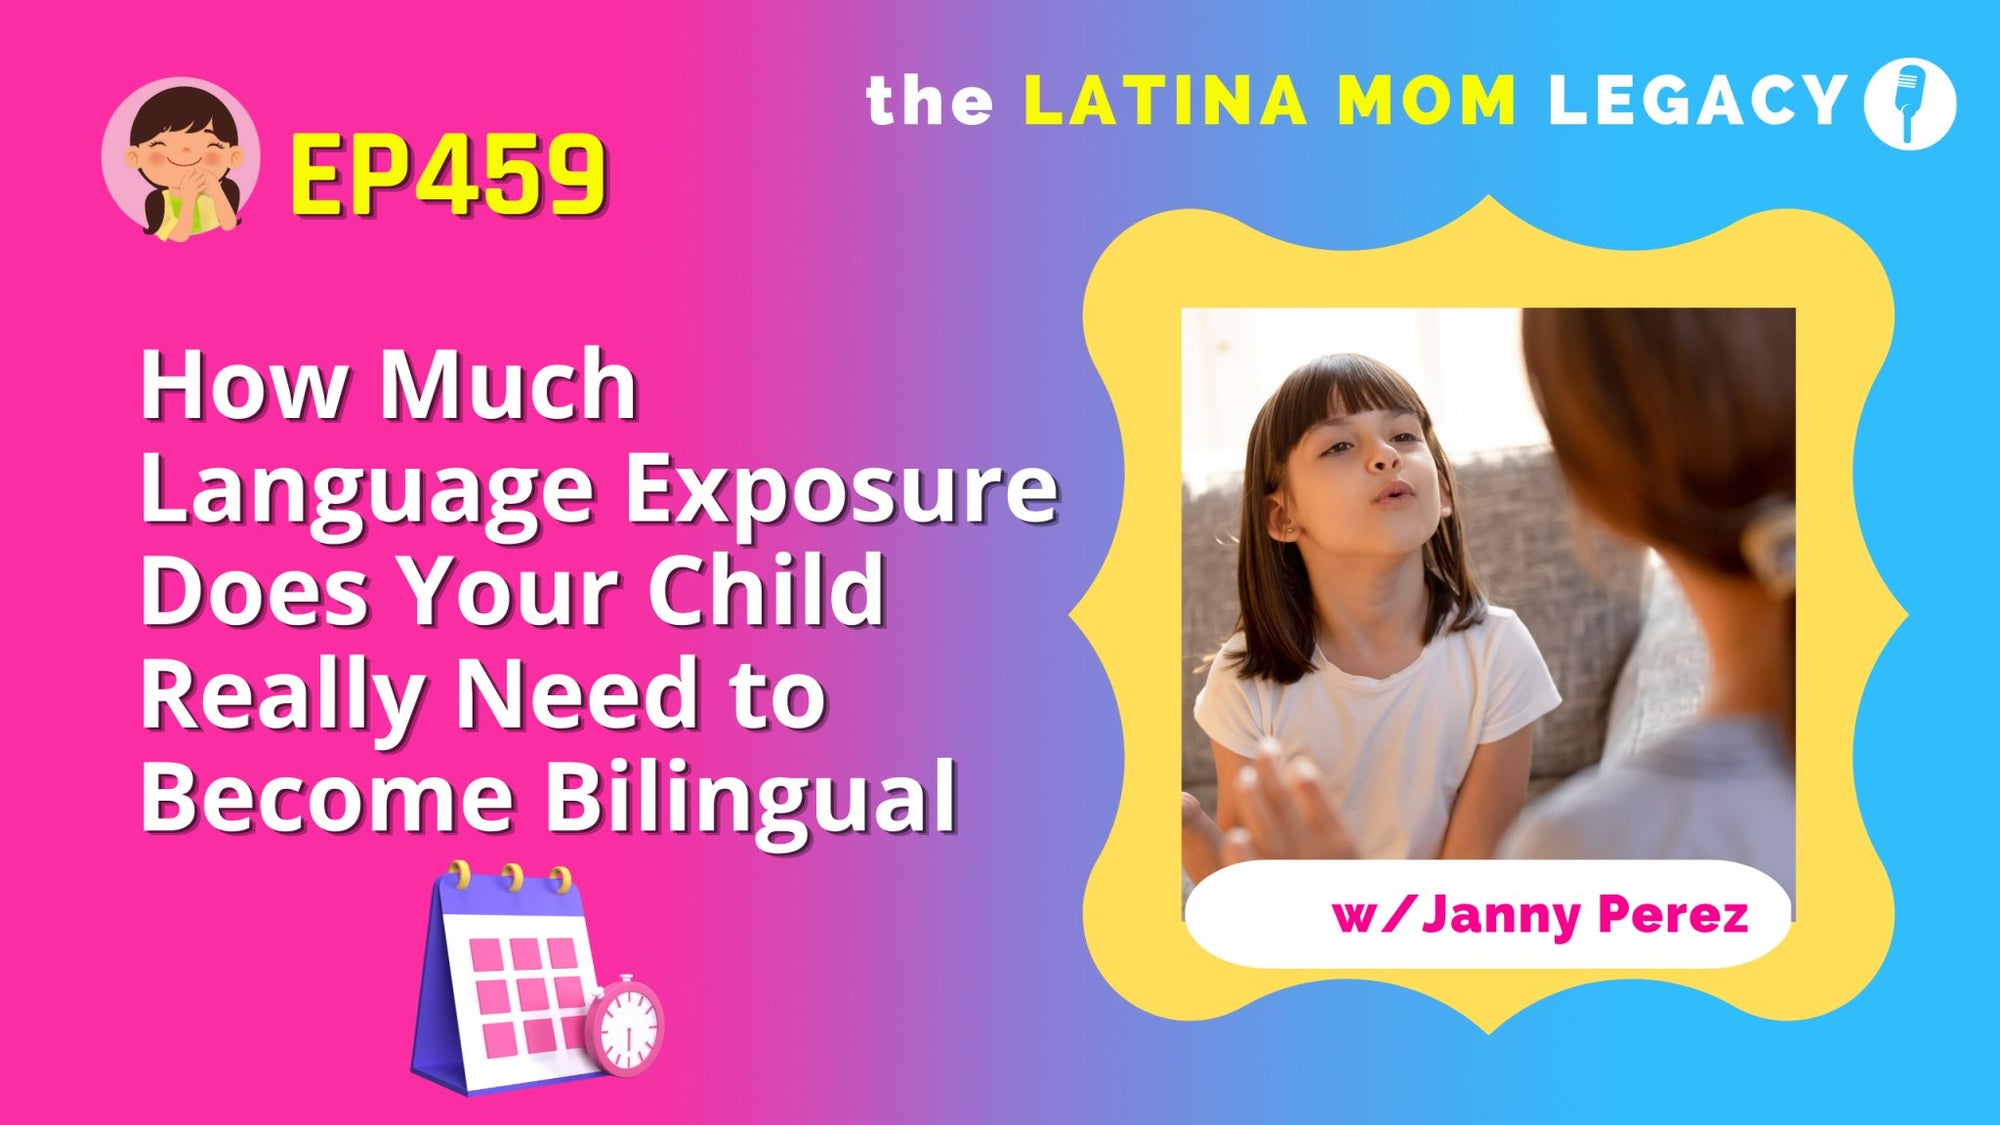 EP 459 How Much Language Exposure Does Your Child Really Need to Become Bilingual - Mi LegaSi